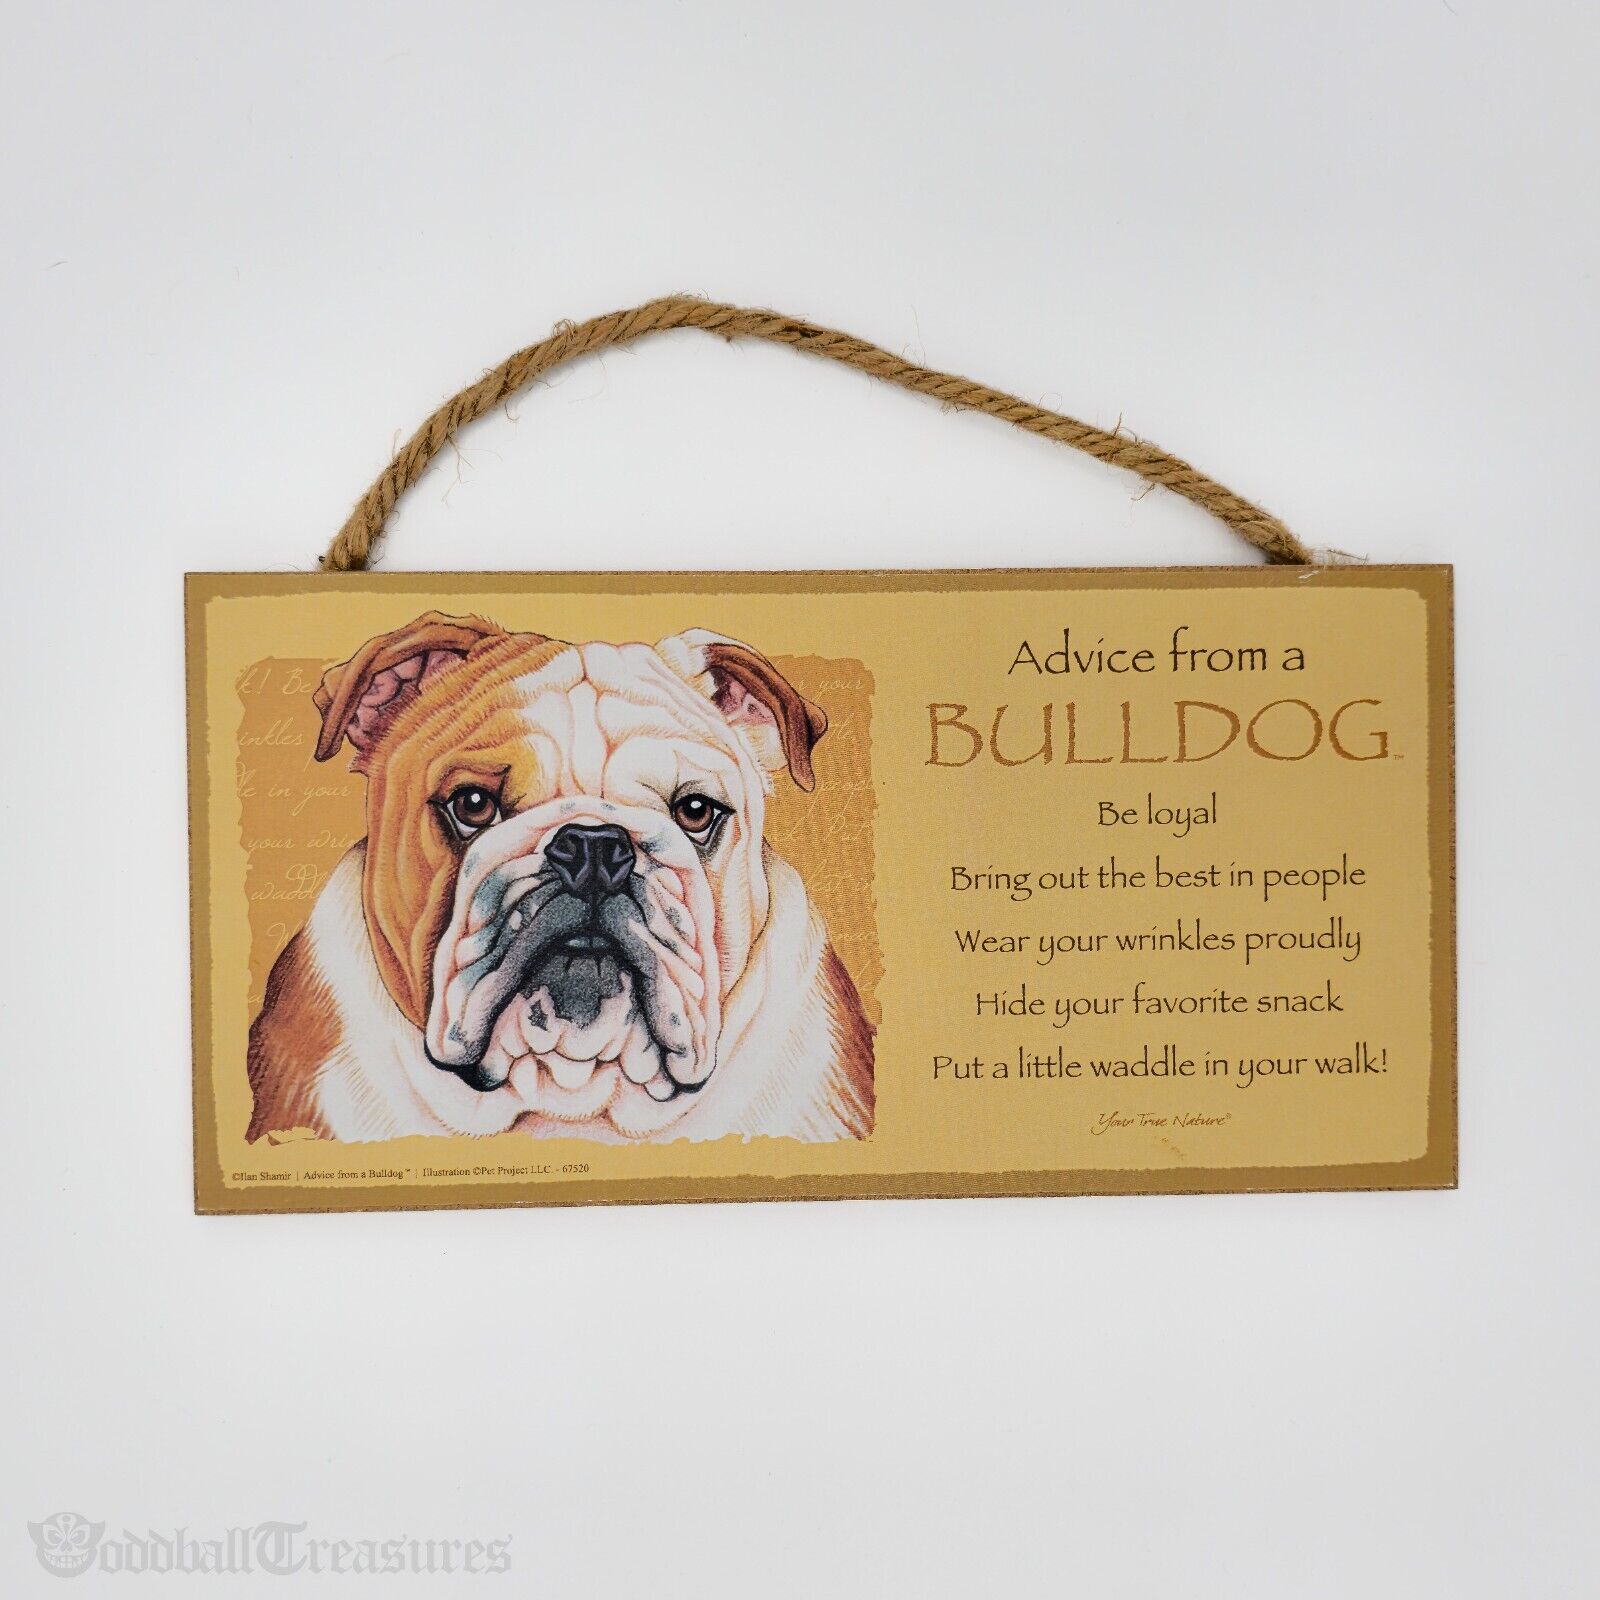 Advice from a BULLDOG - 5 X 10 hanging Wood Sign made in the USA